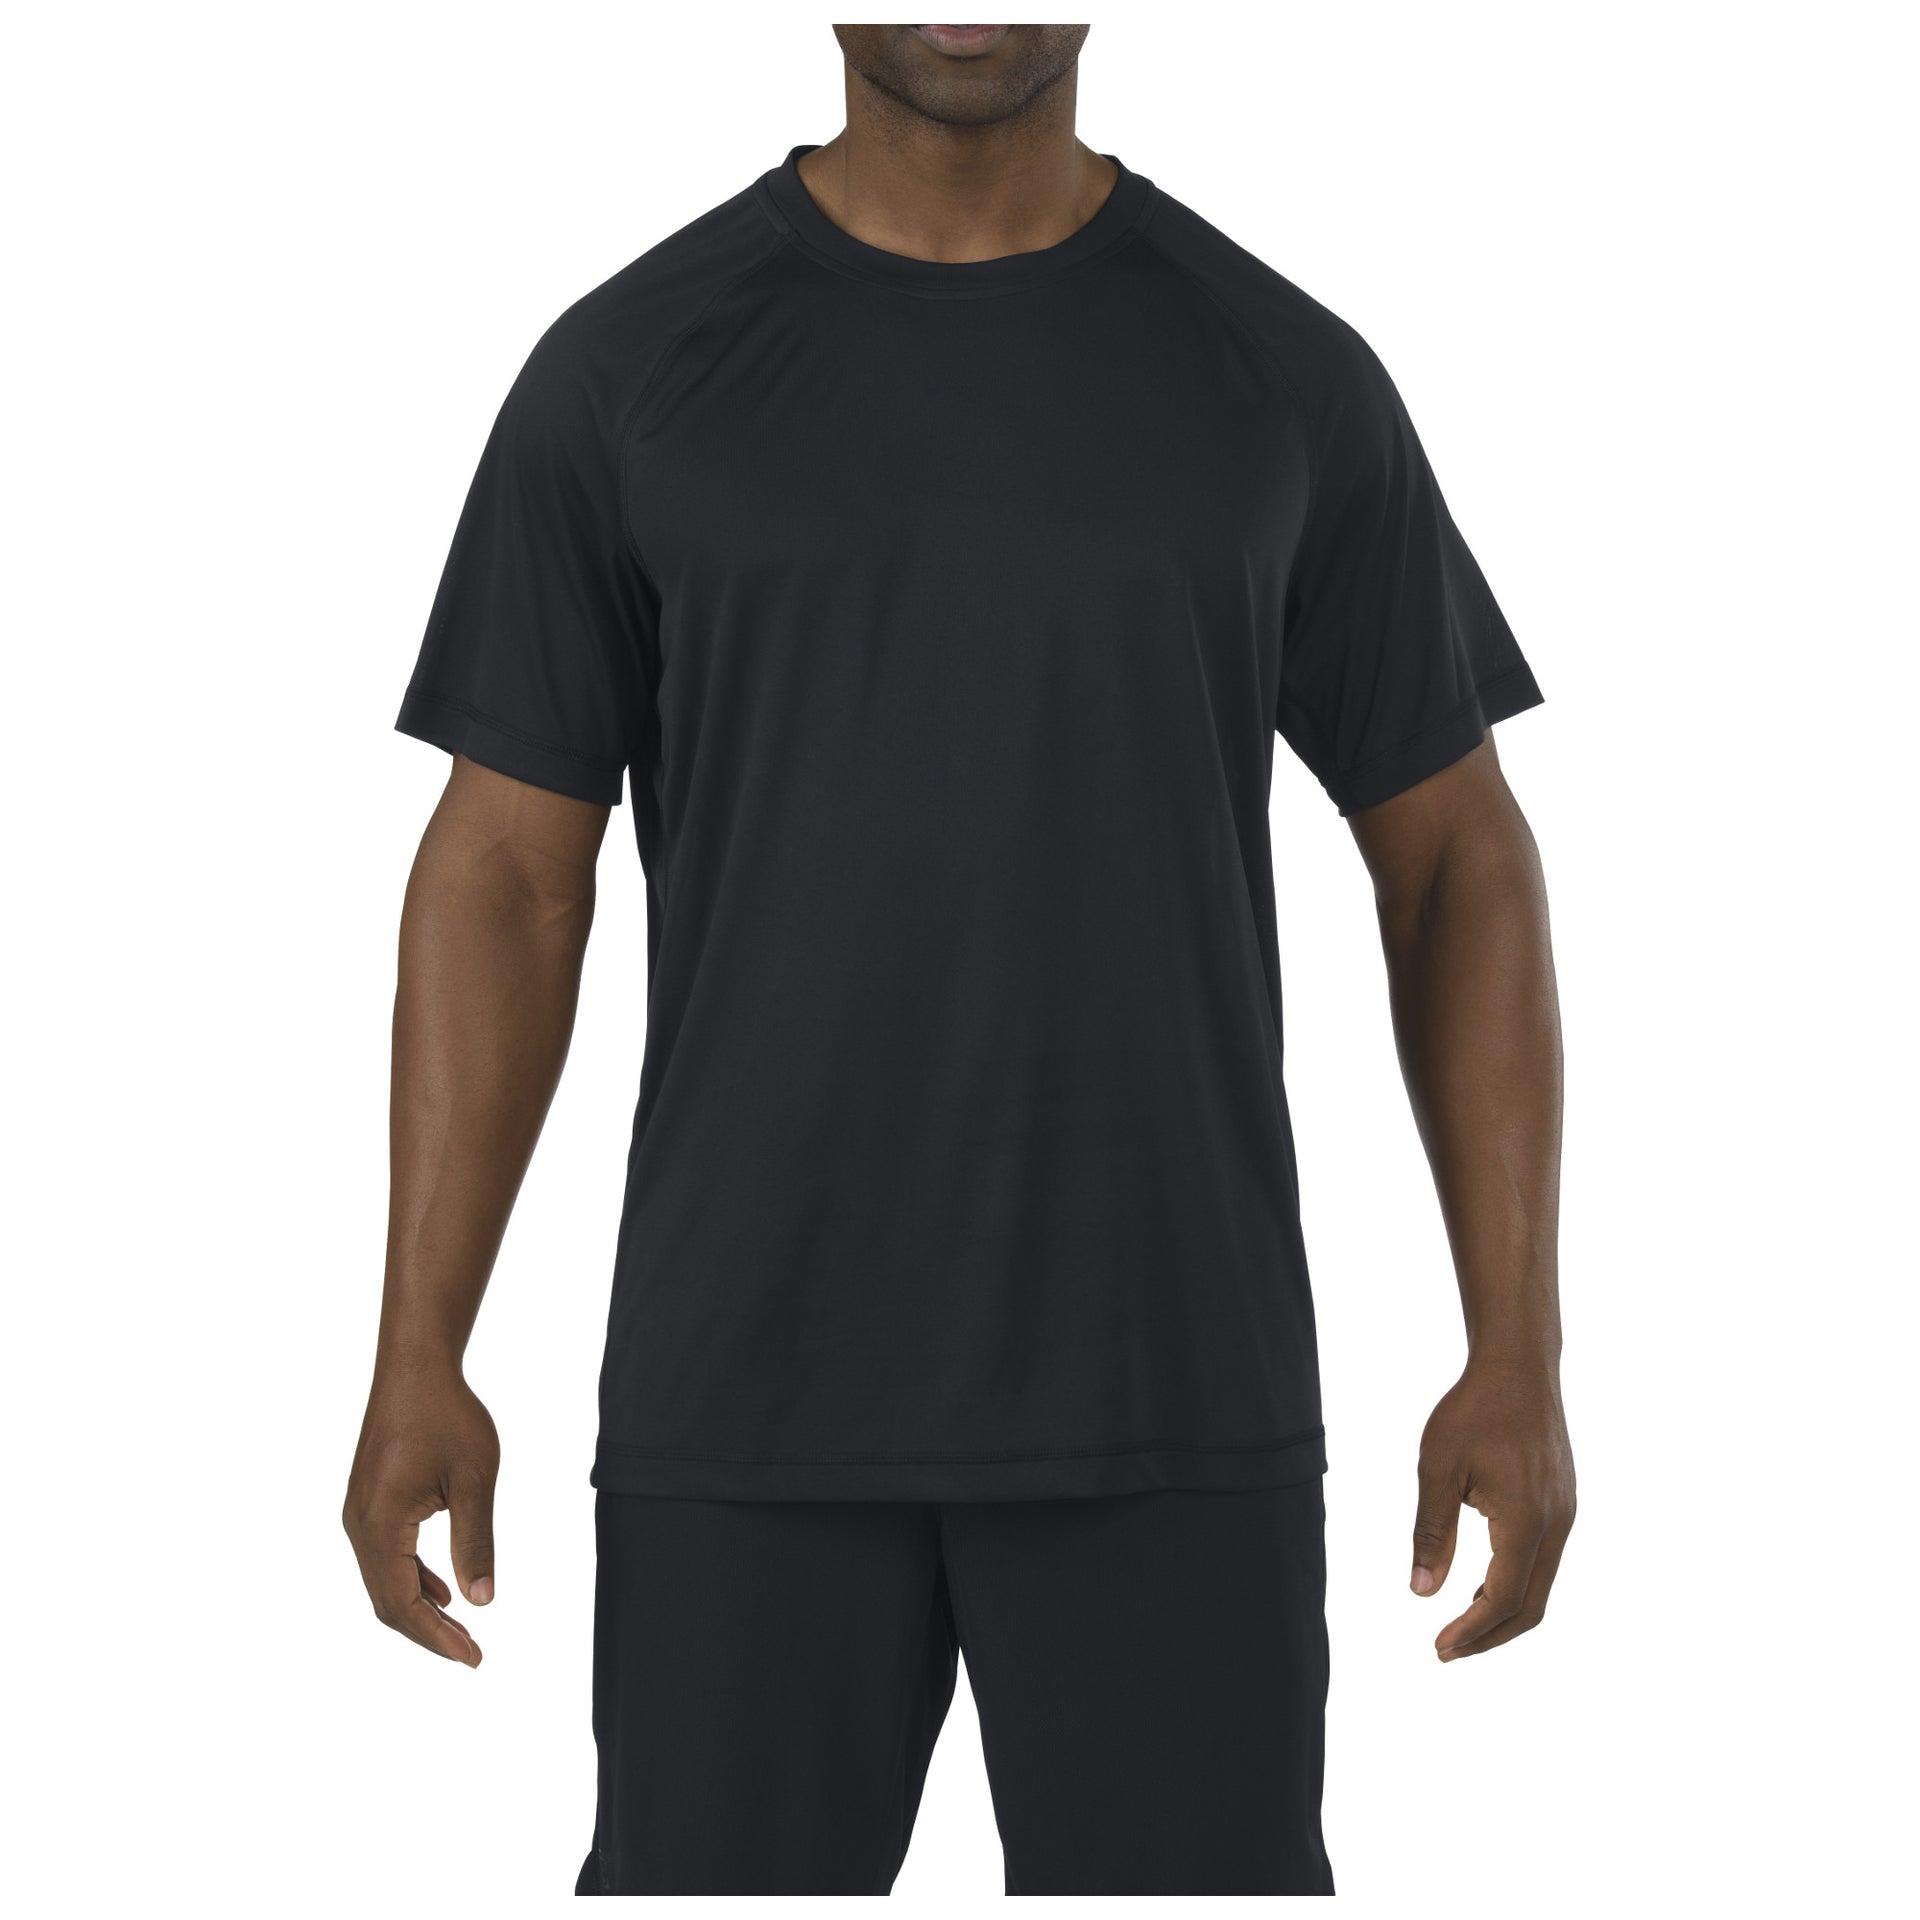 5.11 Tactical Utility PT Shirt (41017) | The Fire Center | Fuego Fire Center | An efficient, effective PT shirt for any climate or setting, made to maximize your training regimen. Crafted from a lightweight, breathable fabric, the Utility PT Shirt features an odor control, moisture-wicking finish, raglan sleeves, and fully gusseted underarms. 